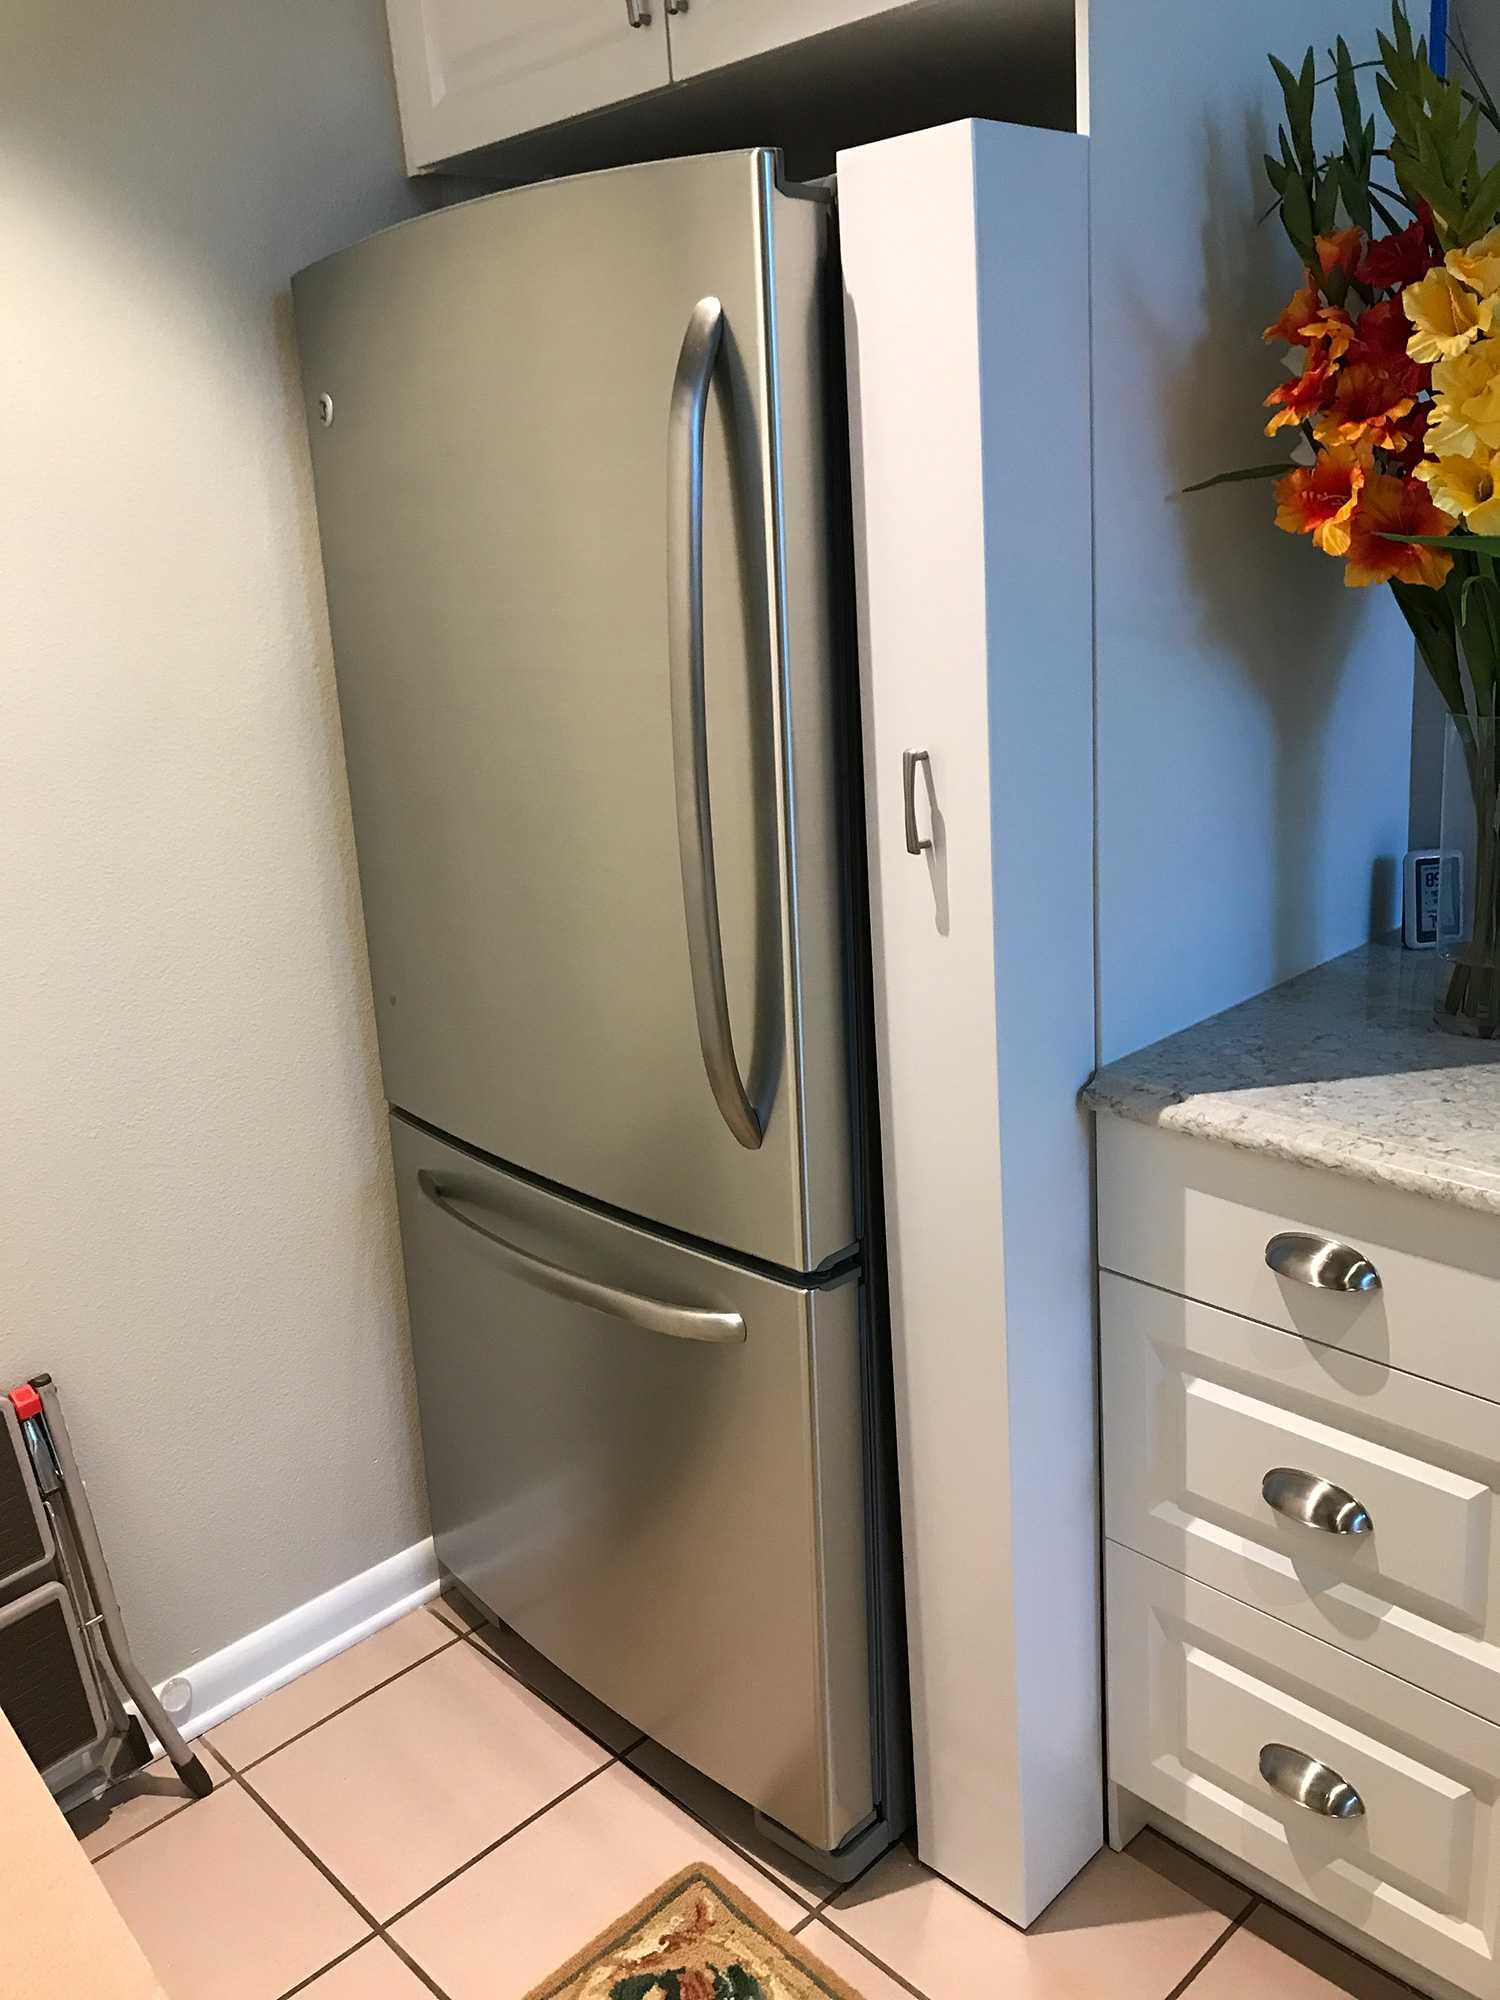 Custom sliding device fitting perfectly between the side of the fridge and counter